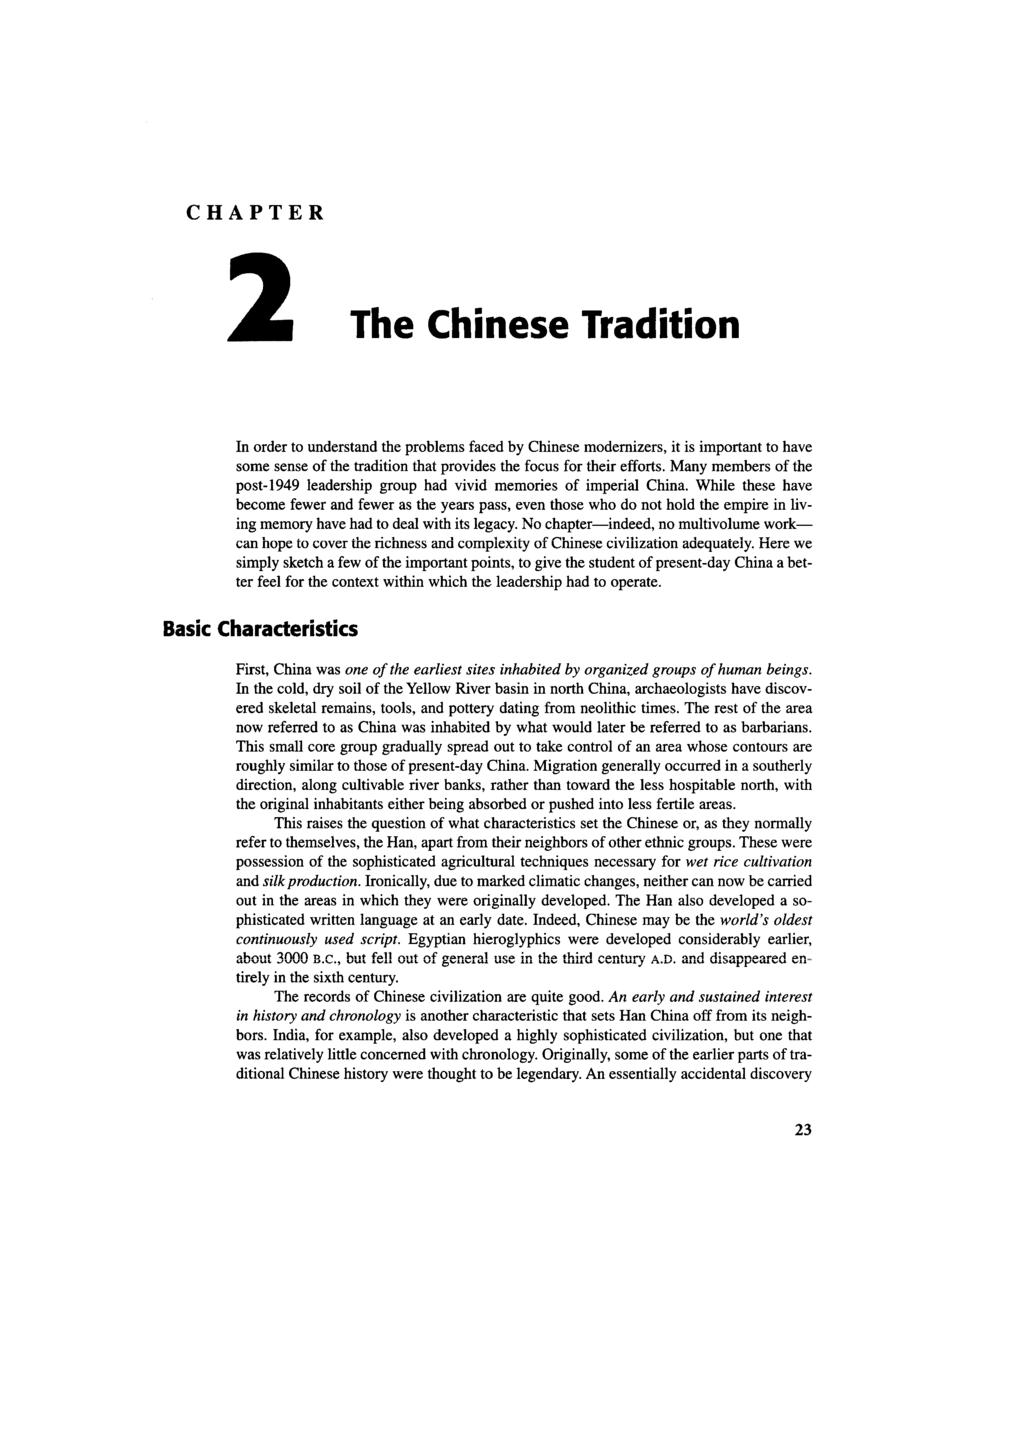 CHAPTER 2 The Chinese Tradition In order to understand the problems faced by Chinese modernizers, it is important to have some sense of the tradition that provides the focus for their efforts.